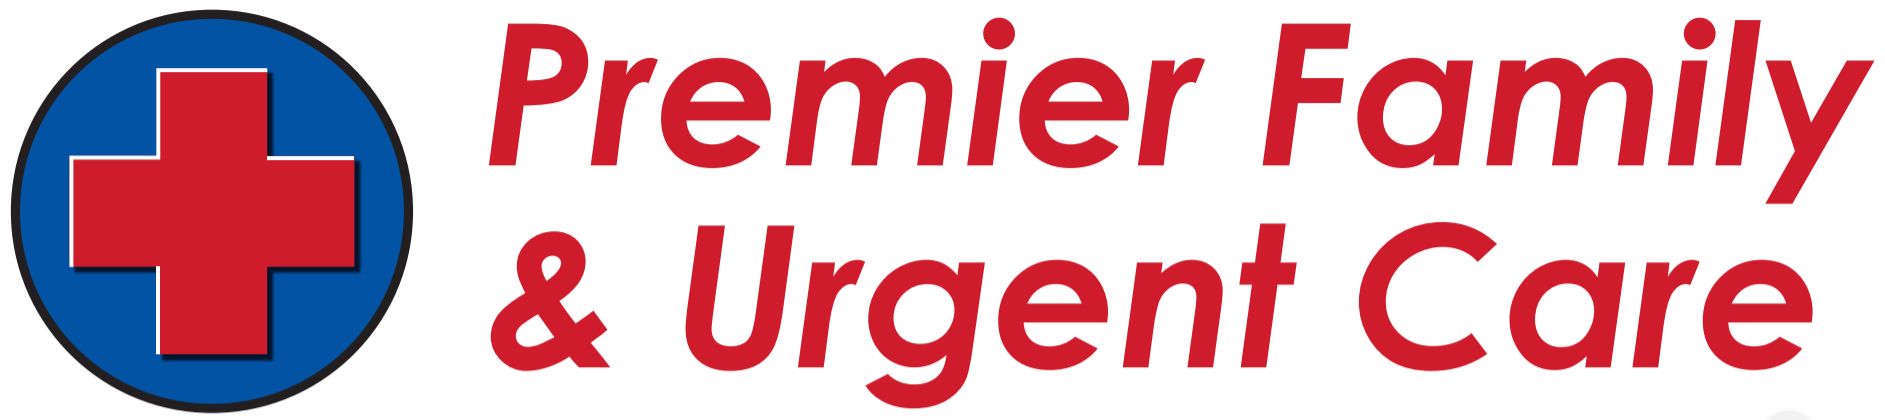 Premier Family and Urgent Care Logo